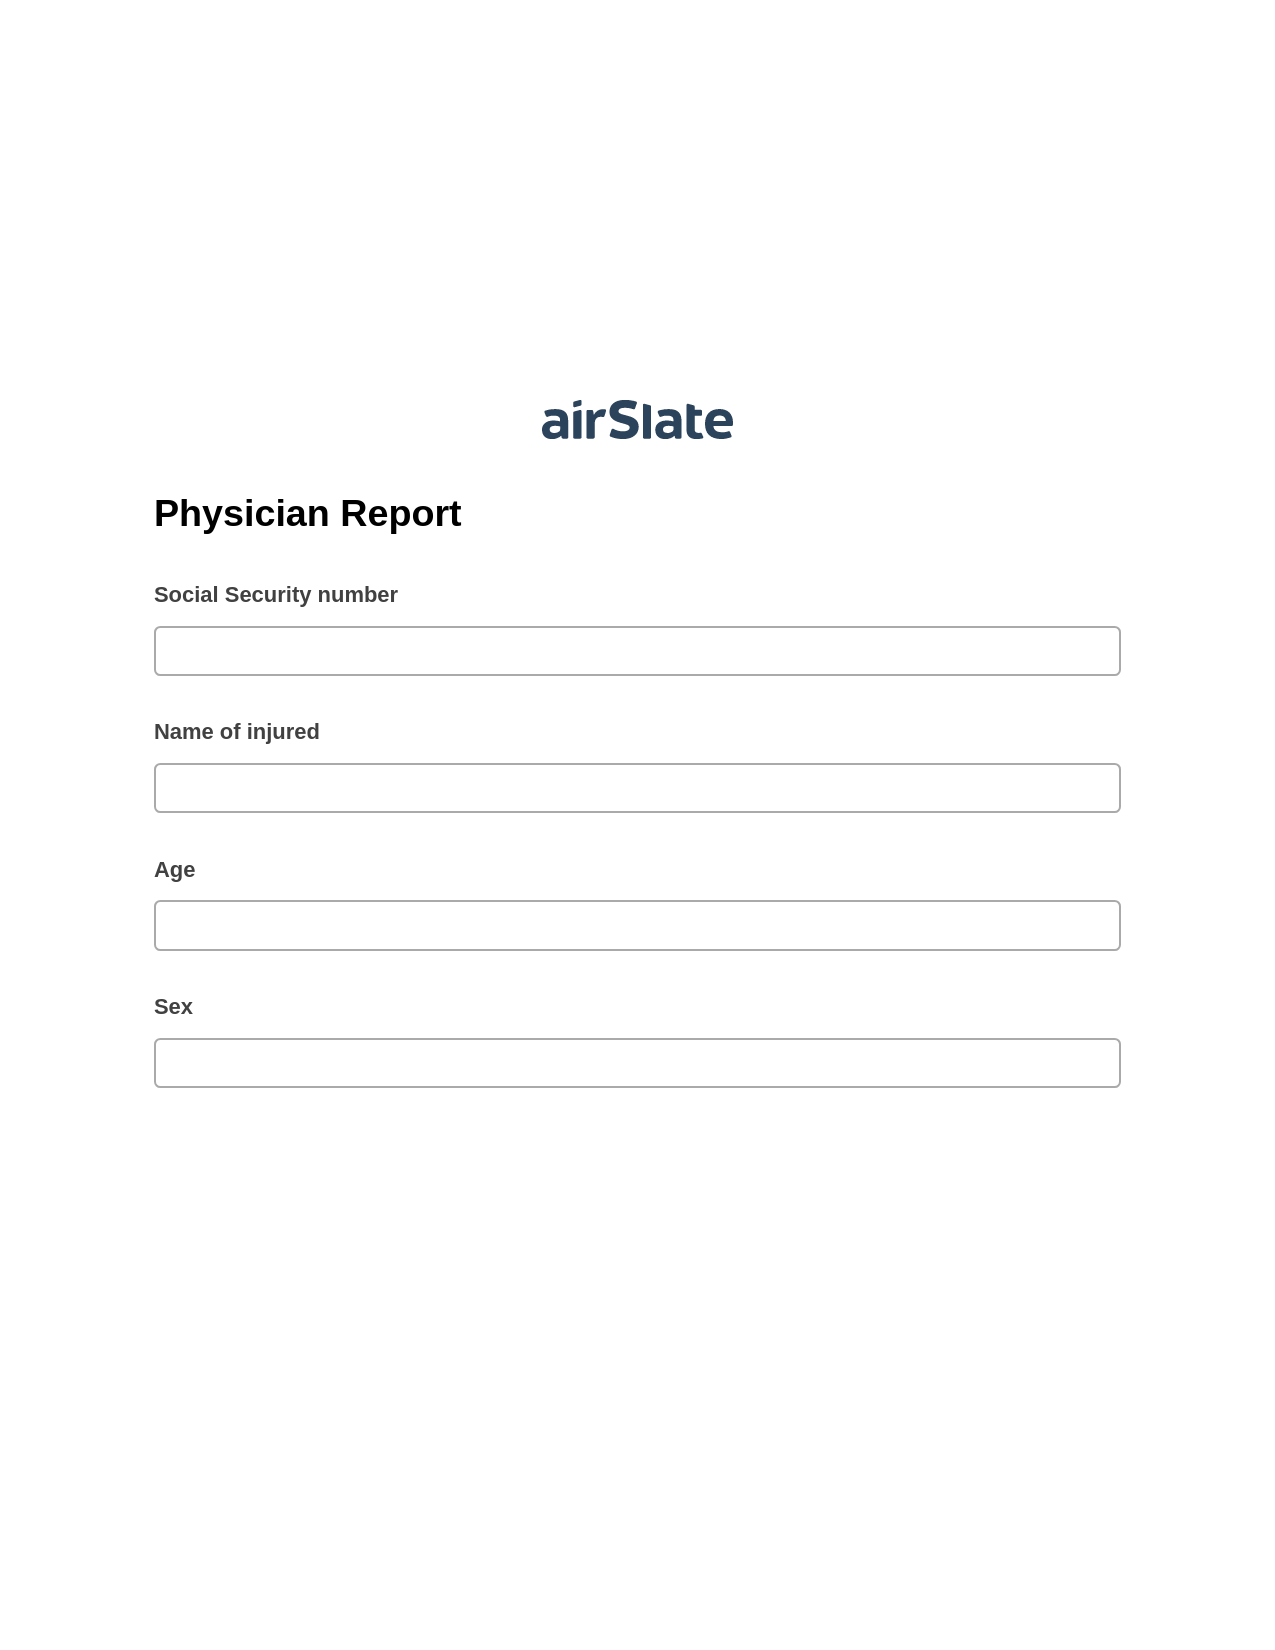 Physician Report Pre-fill Document Bot, Send Mailchimp Campaign Bot, Archive to Dropbox Bot